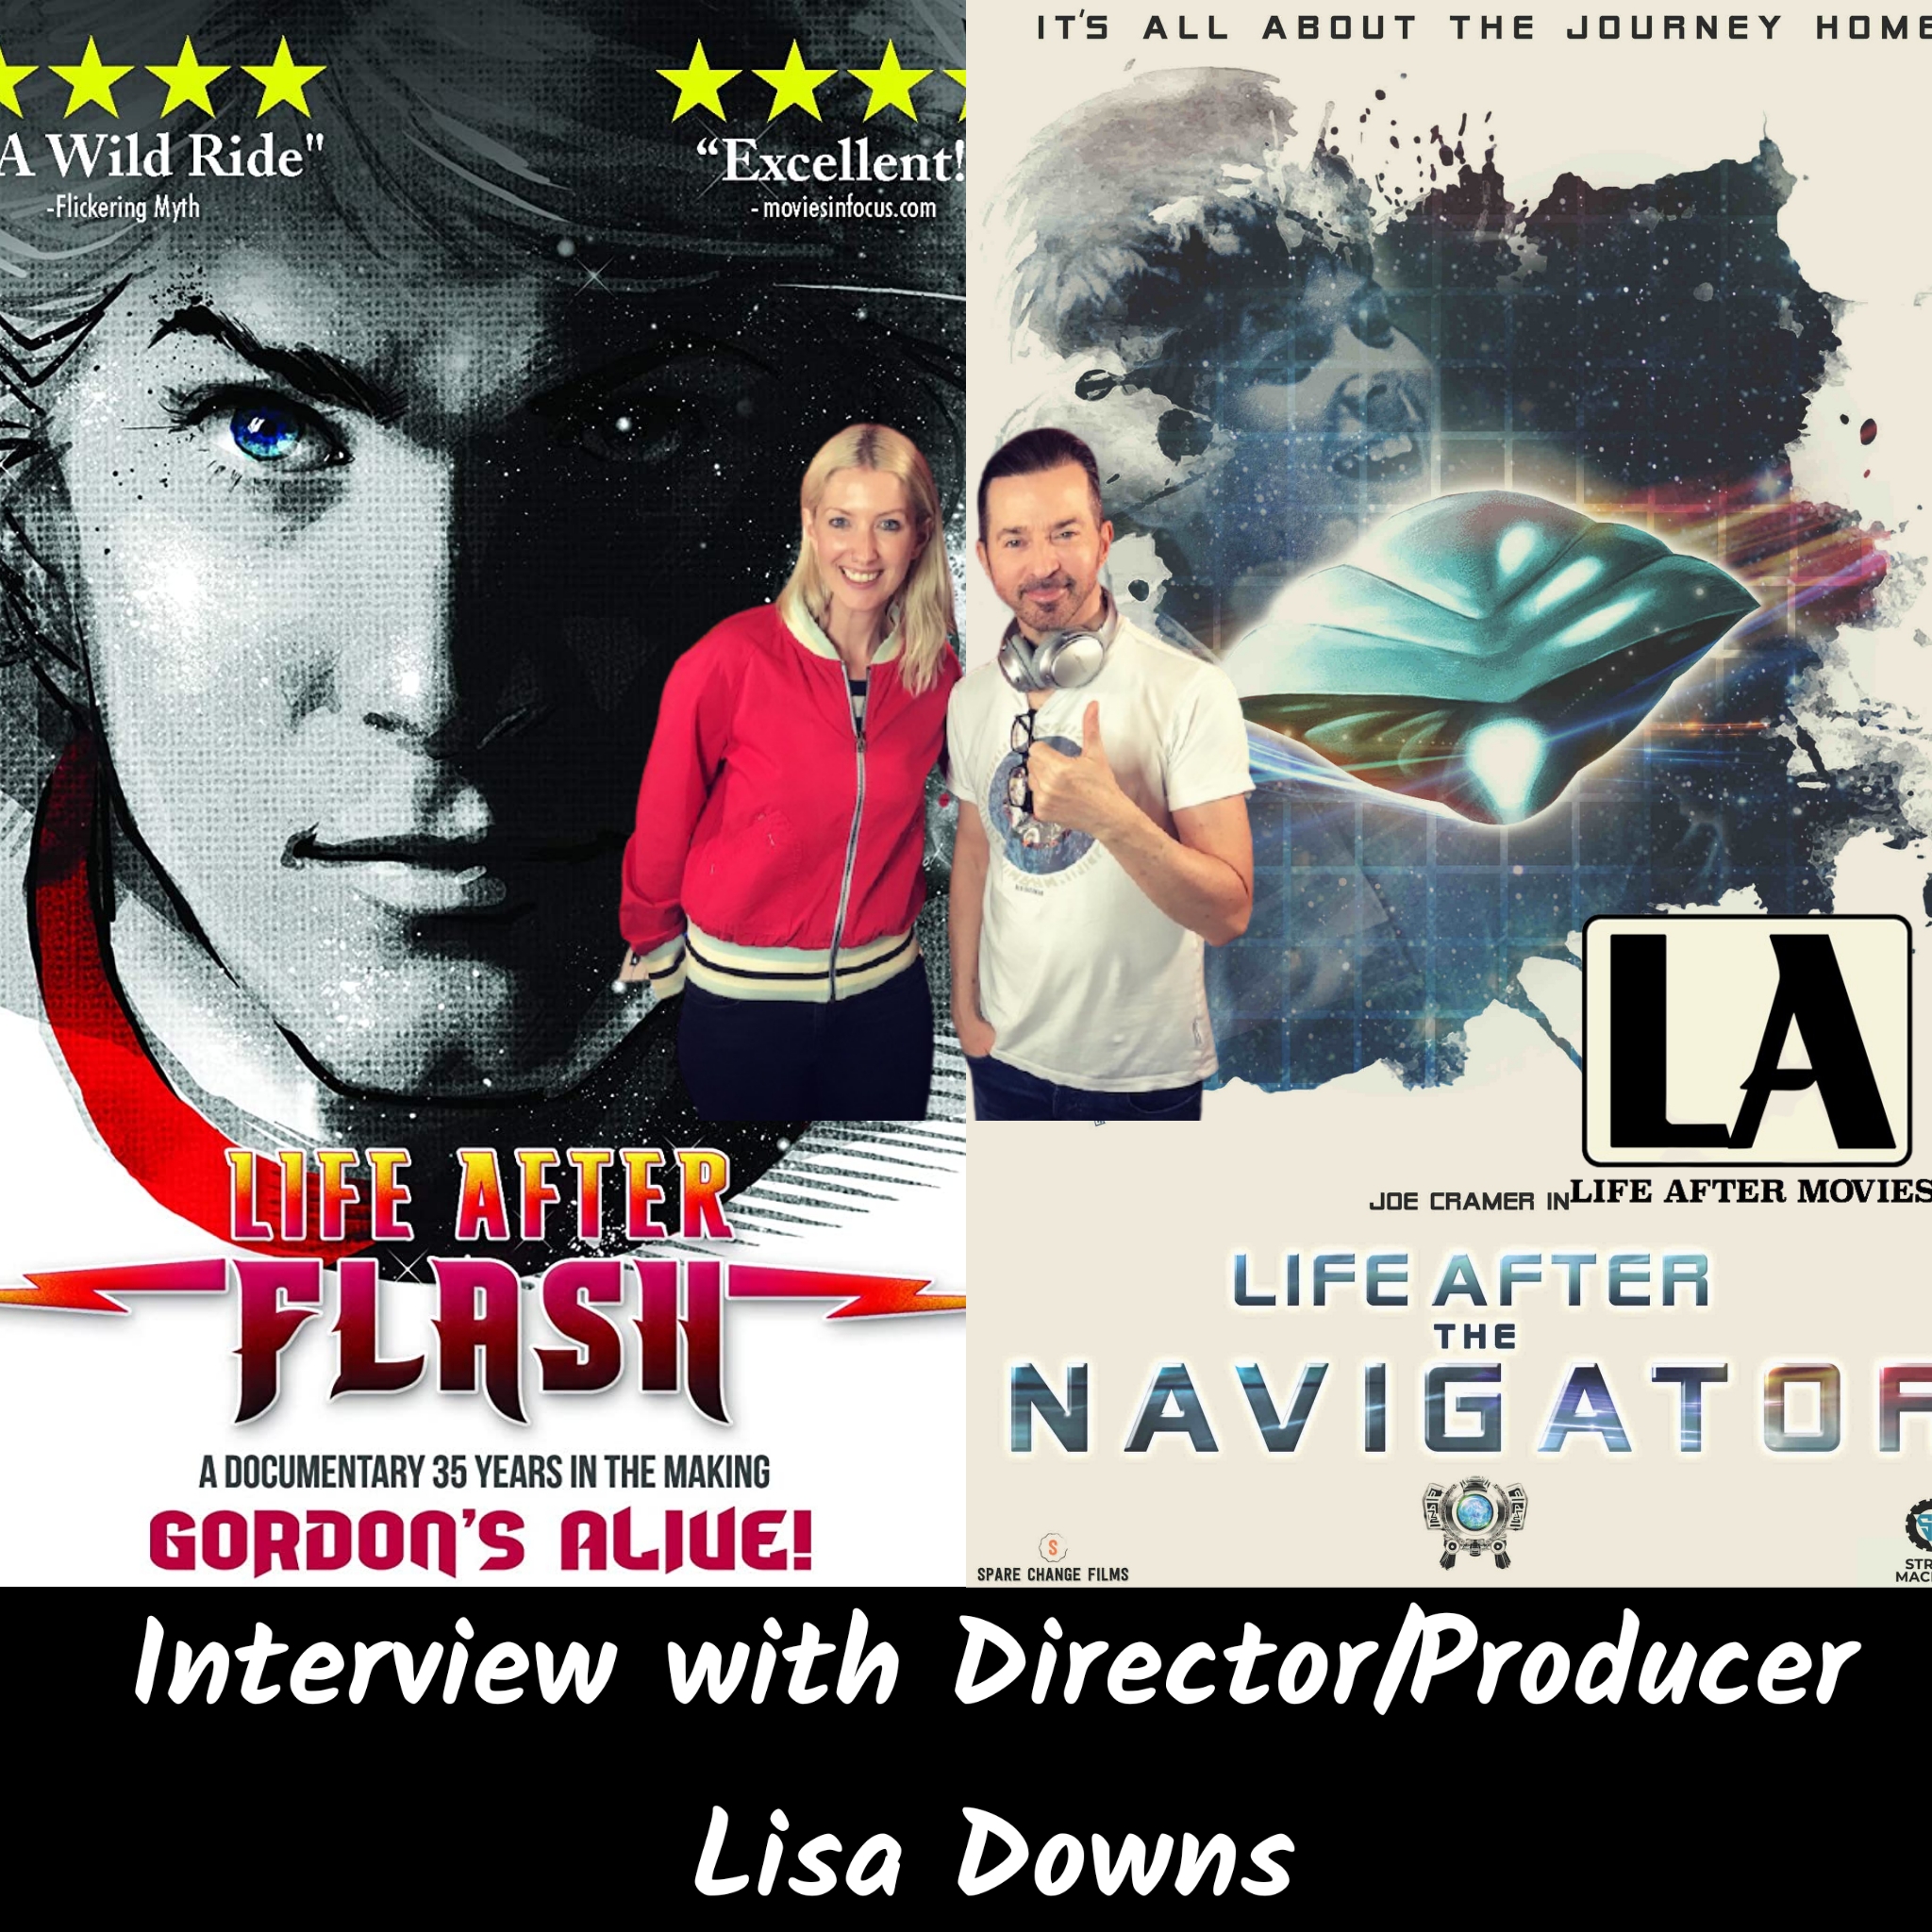 Interview with Director & Owner of Life After Movies, Lisa Downs